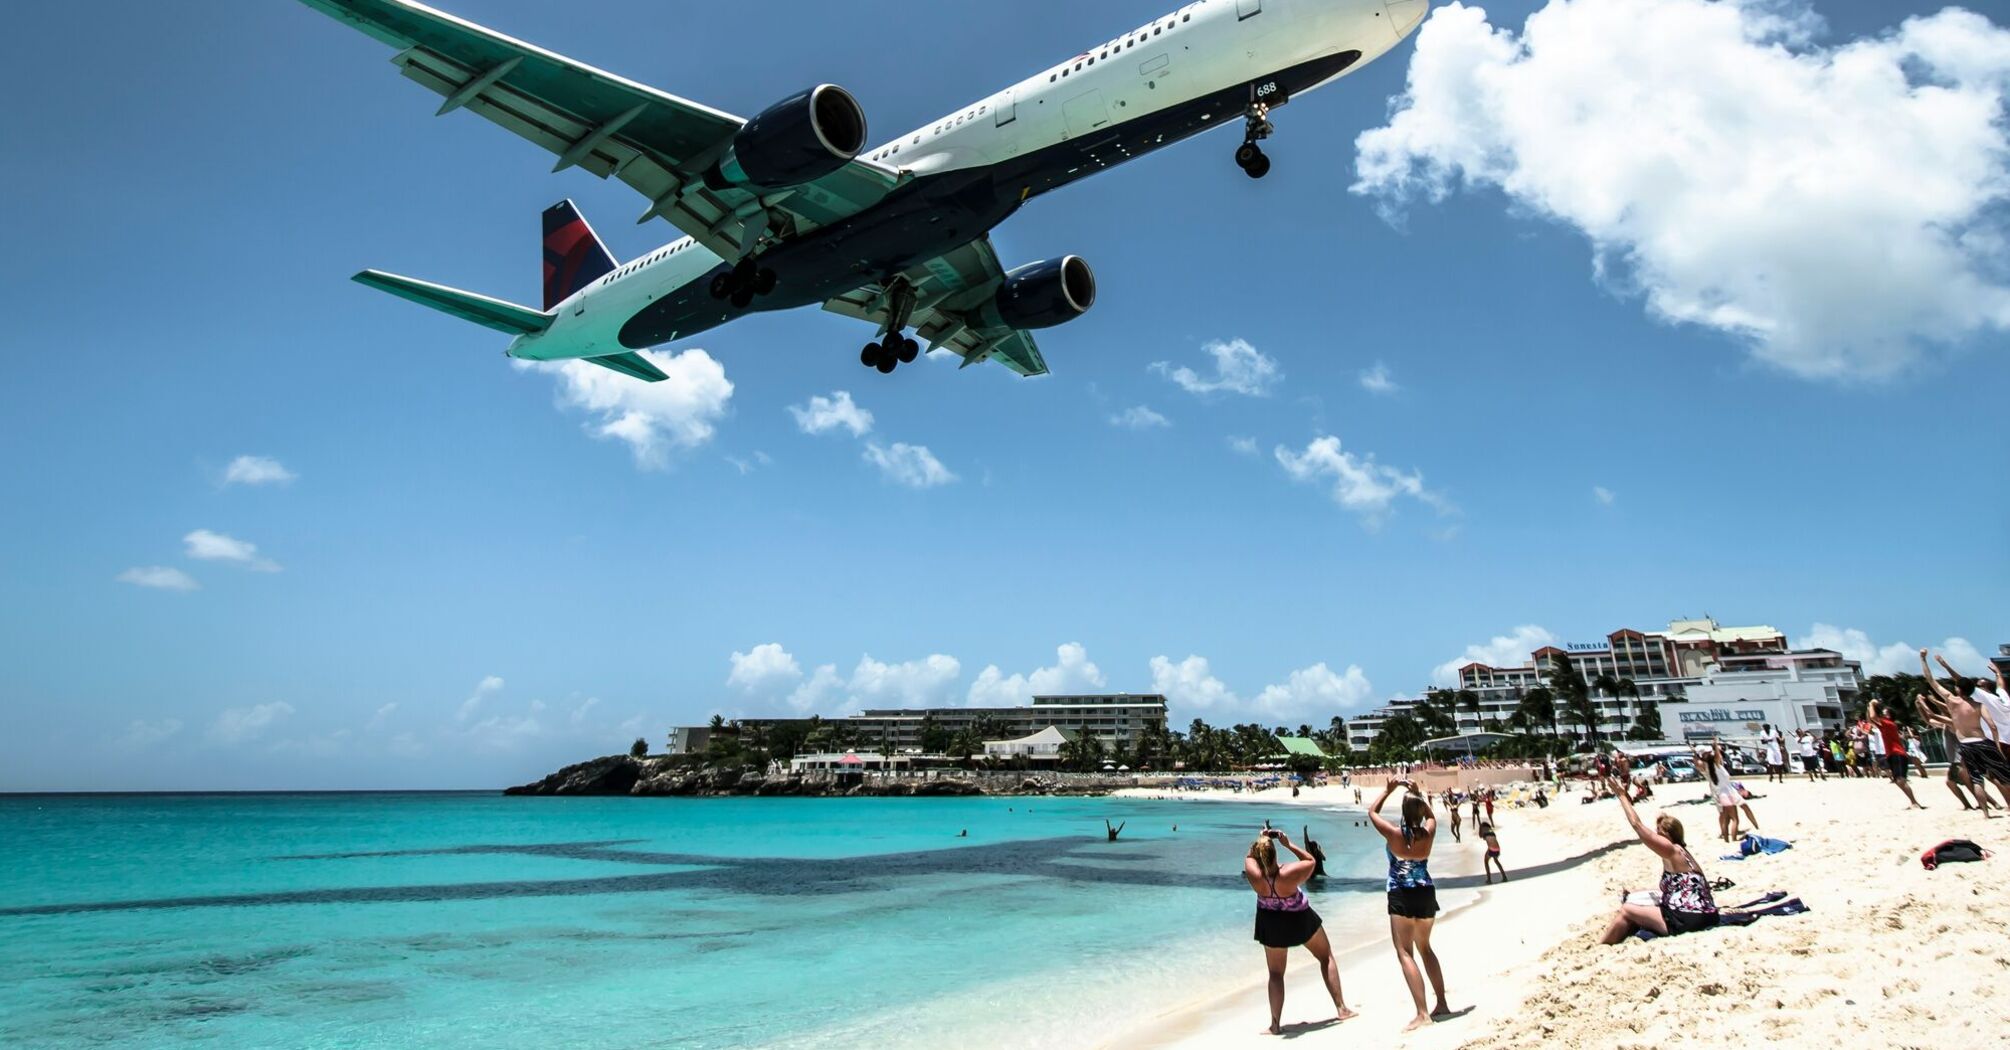 Delta airline plane landing over a tropical beach 